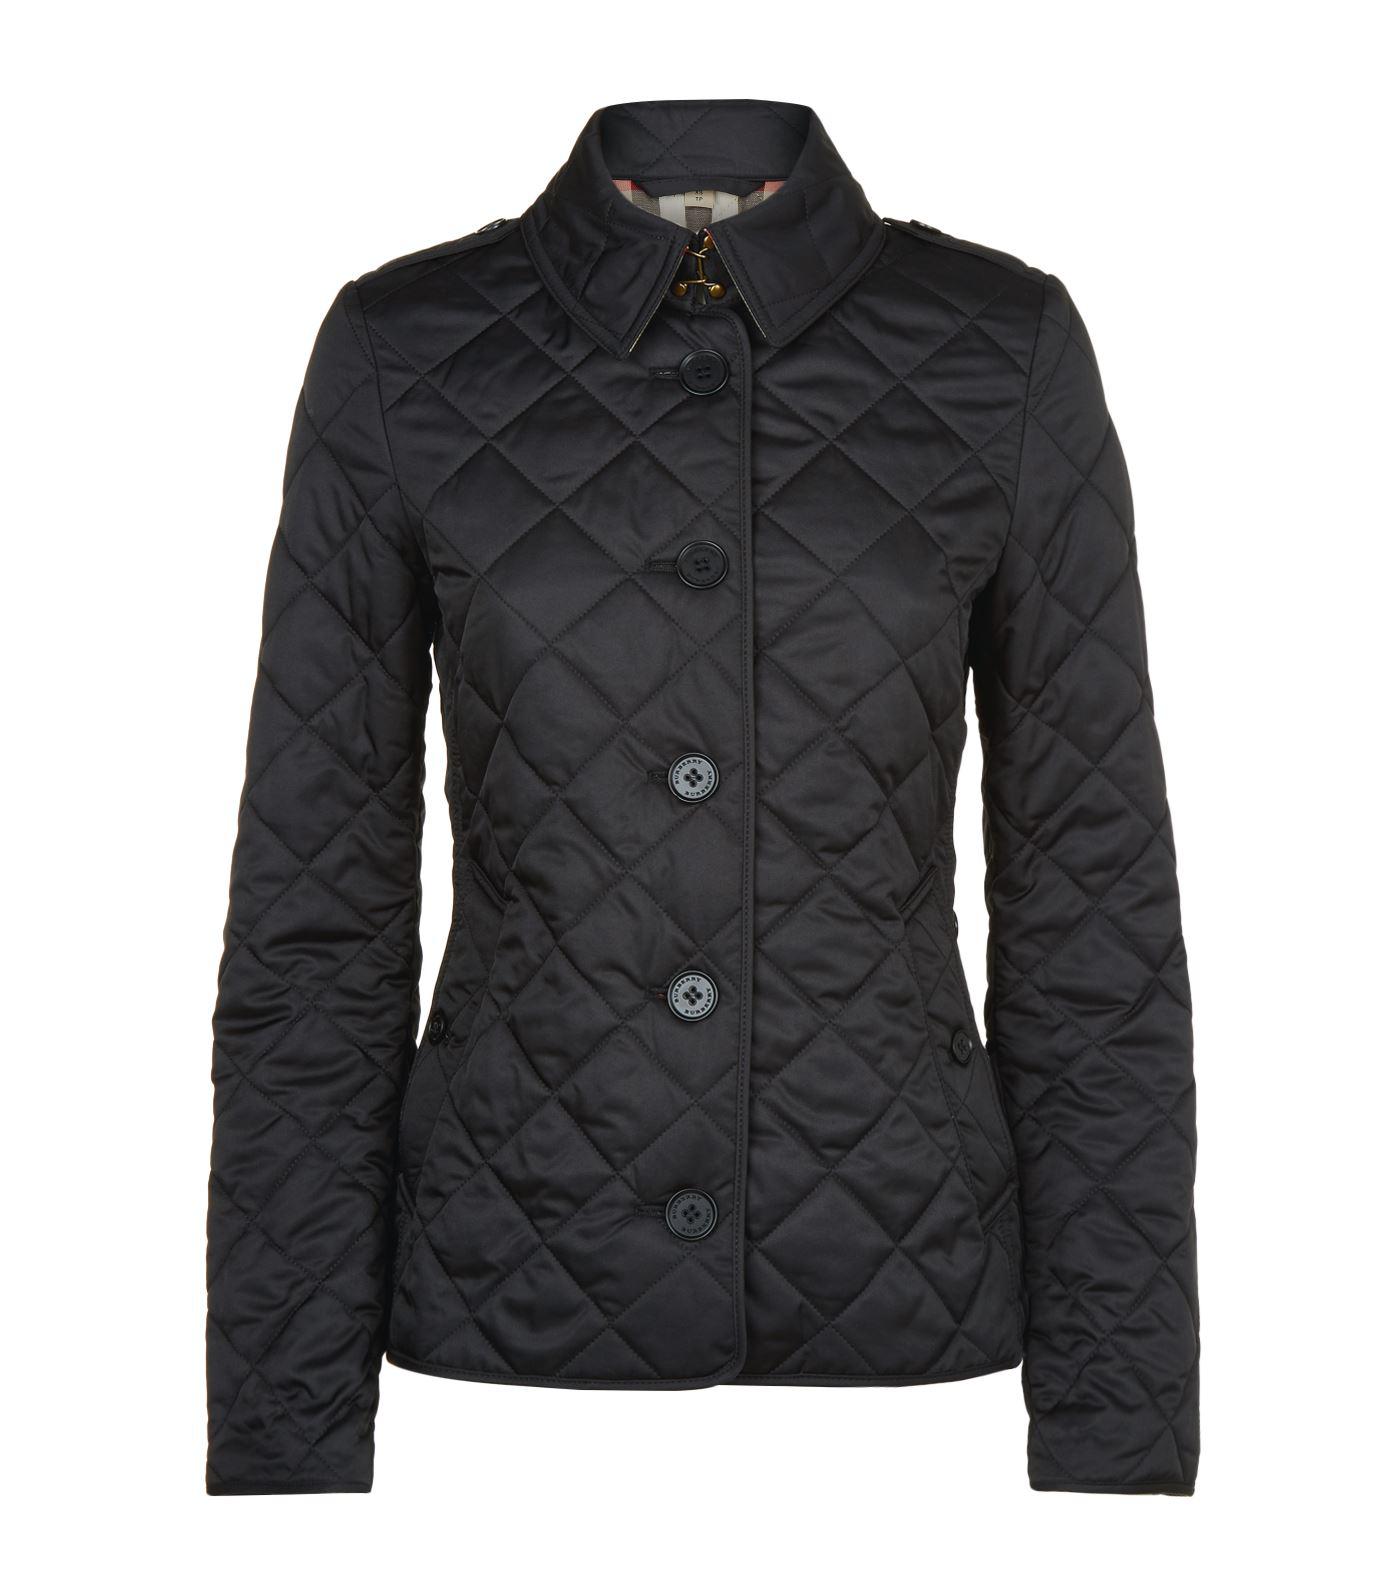 Lyst - Burberry Diamond Quilted Jacket in Black - Save 19.41747572815534%